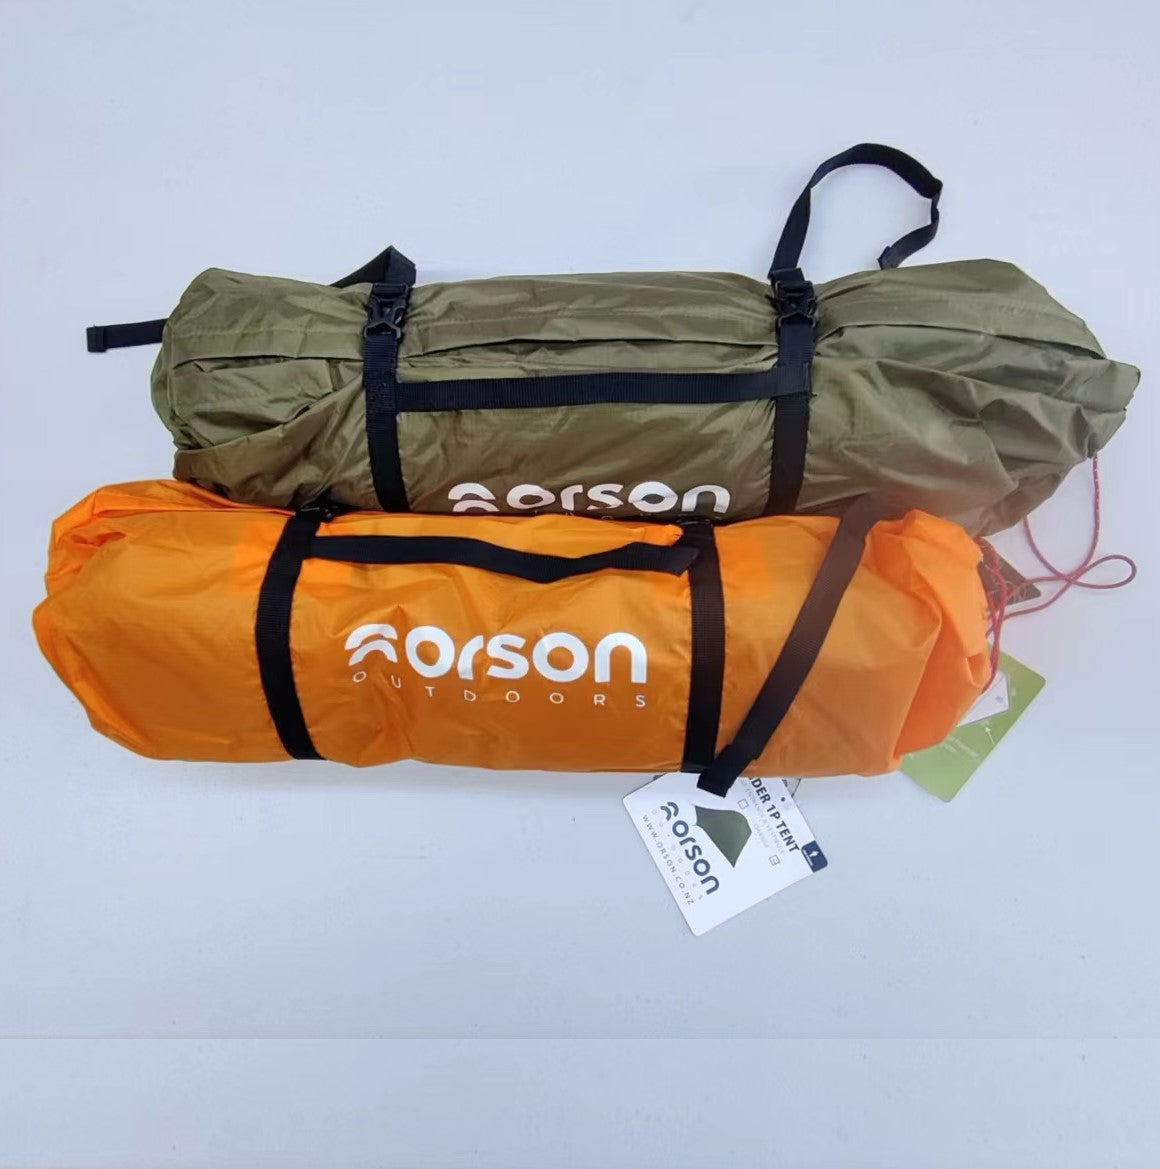 Orson Raider XL 1 Person Tent - Polyester Ripstop, 1.75kg